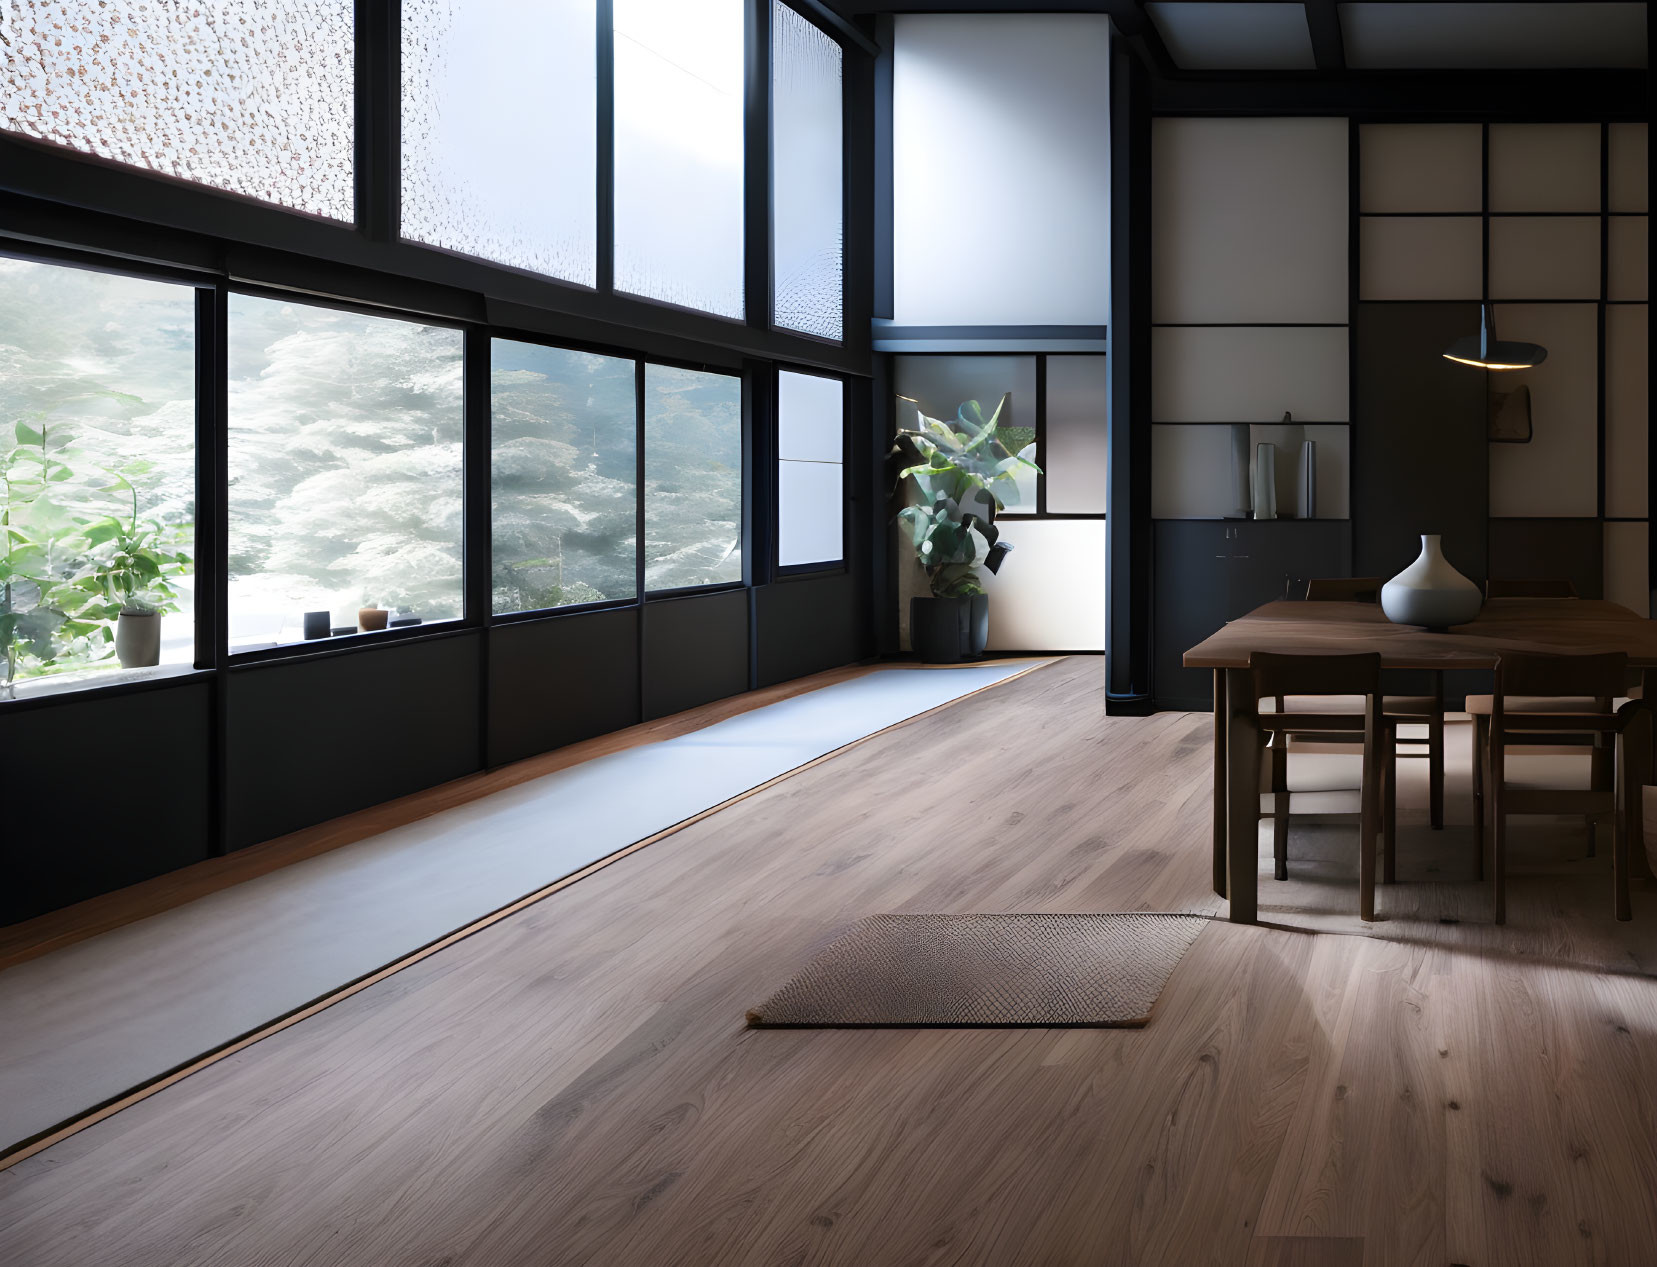 Spacious dining room with wooden furniture, tatami mat floor, and greenery view